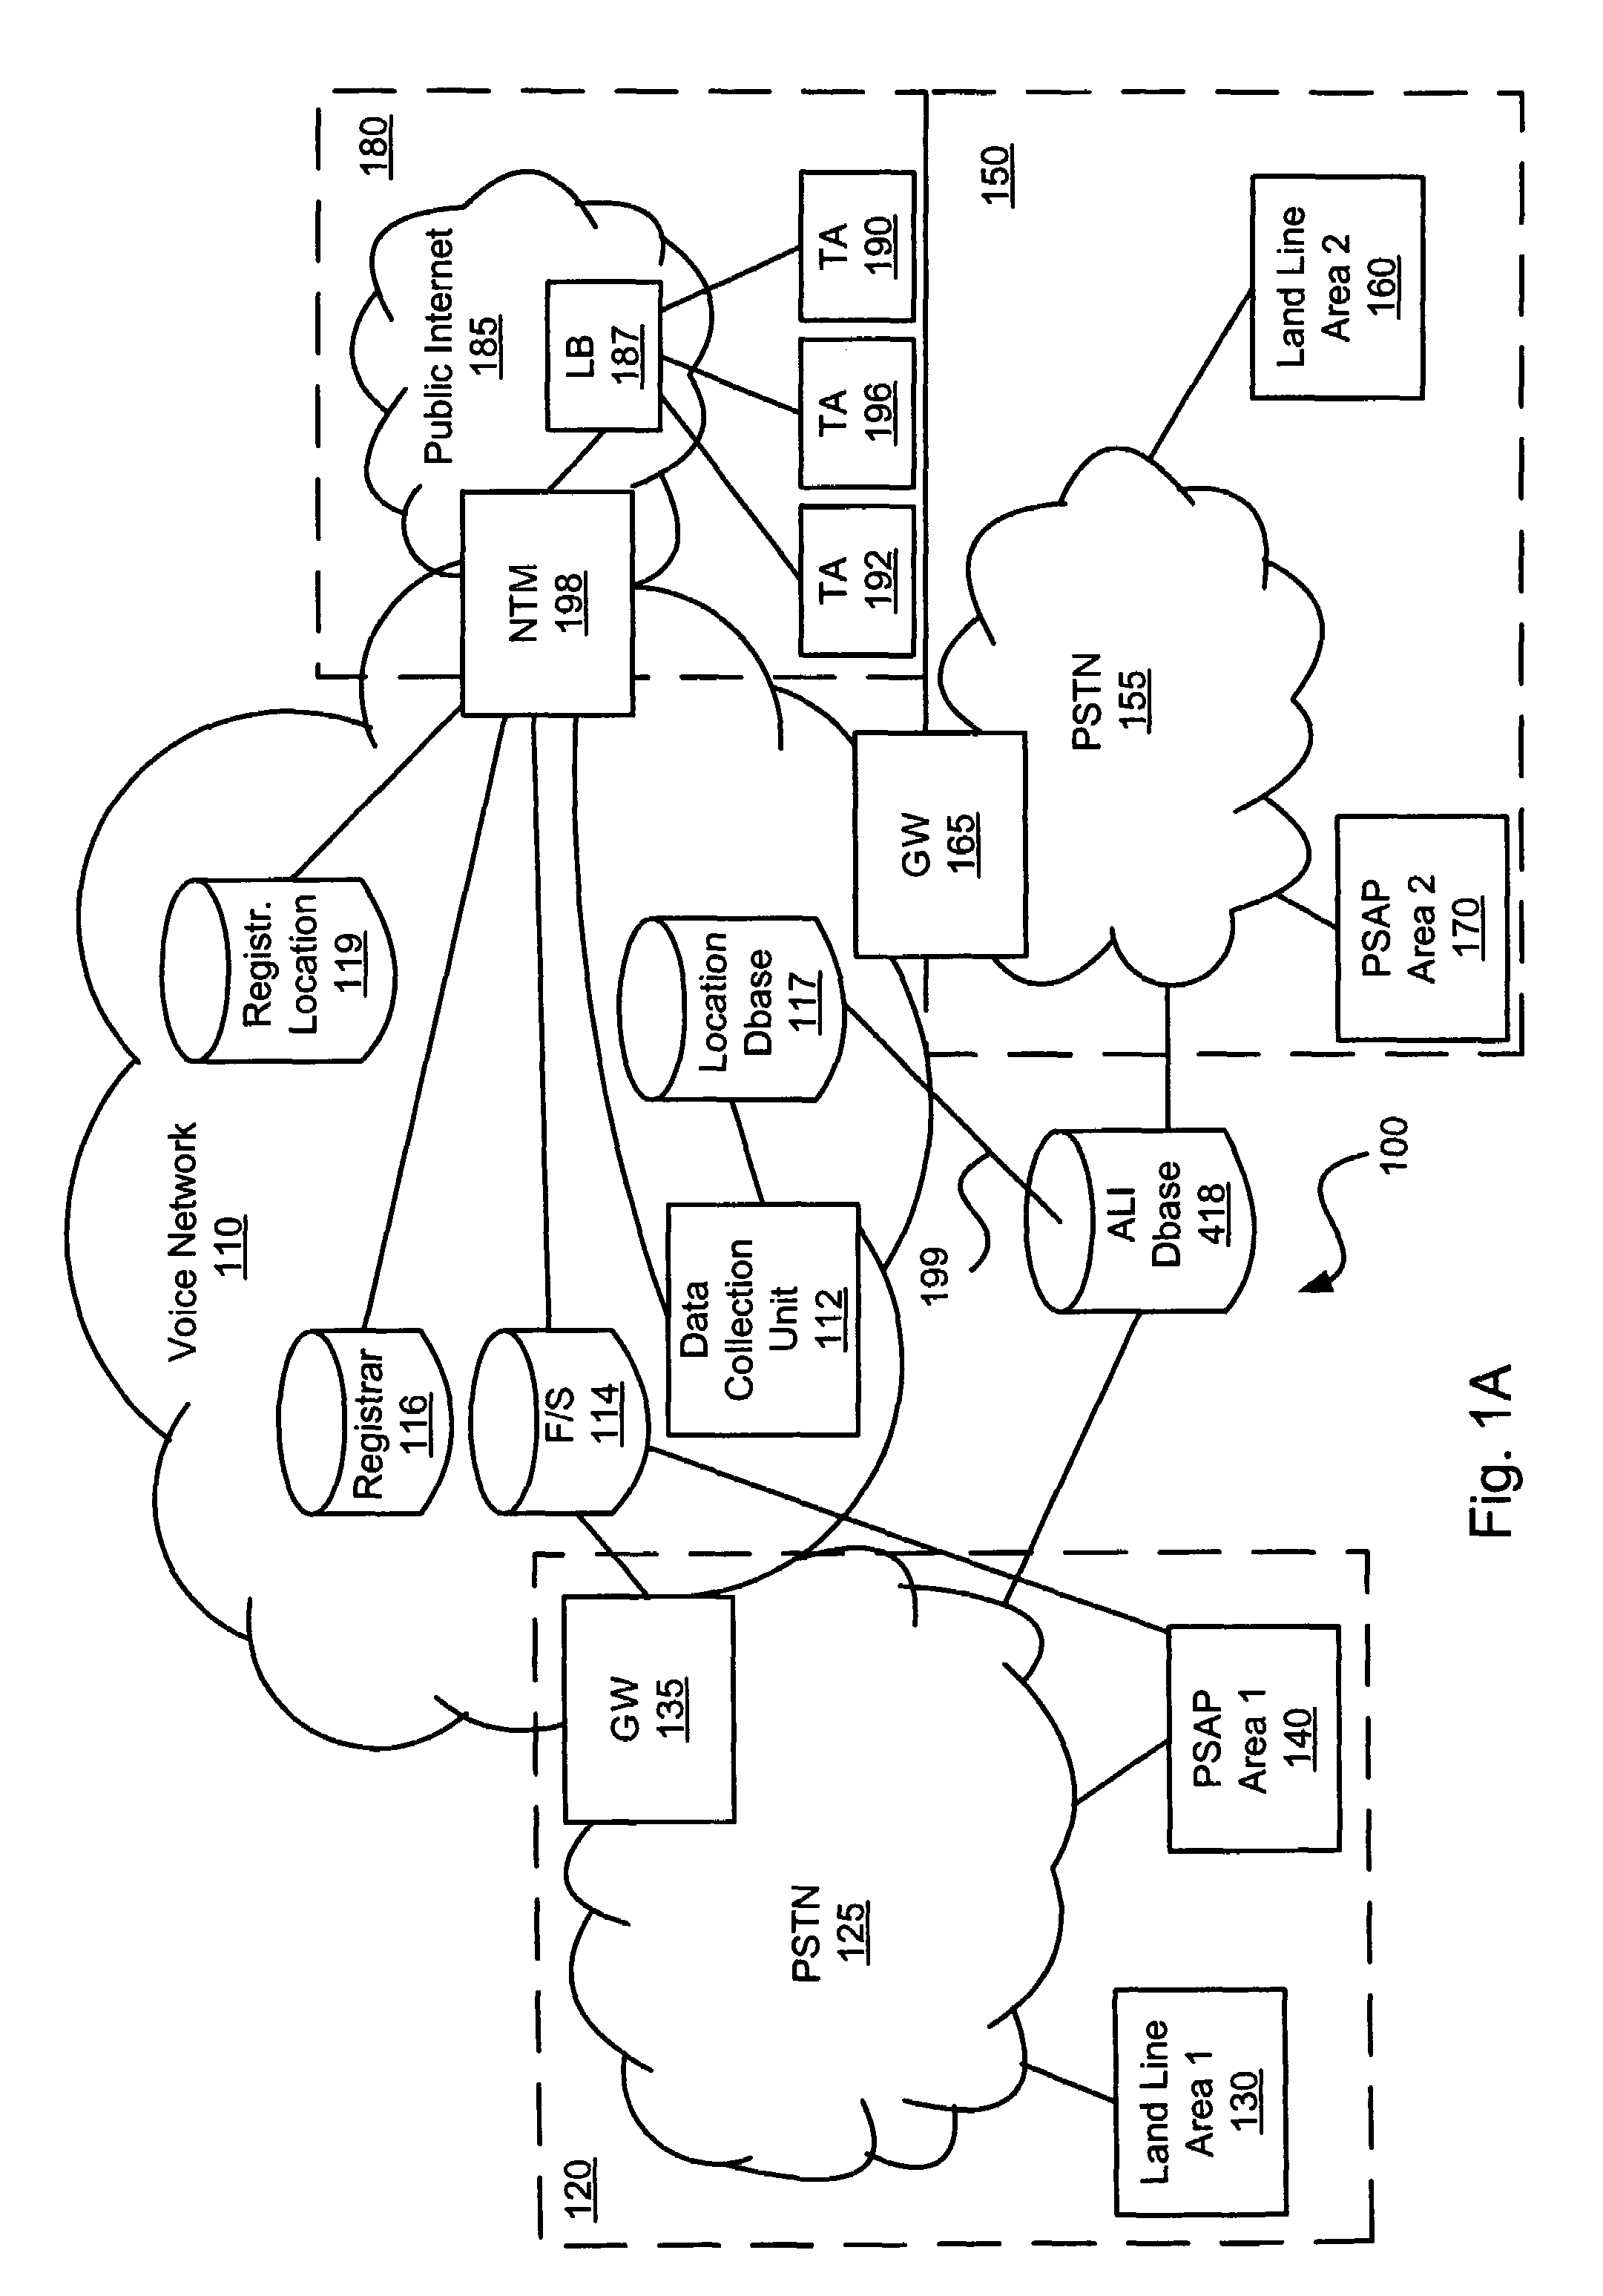 Systems and methods for third party emergency call termination